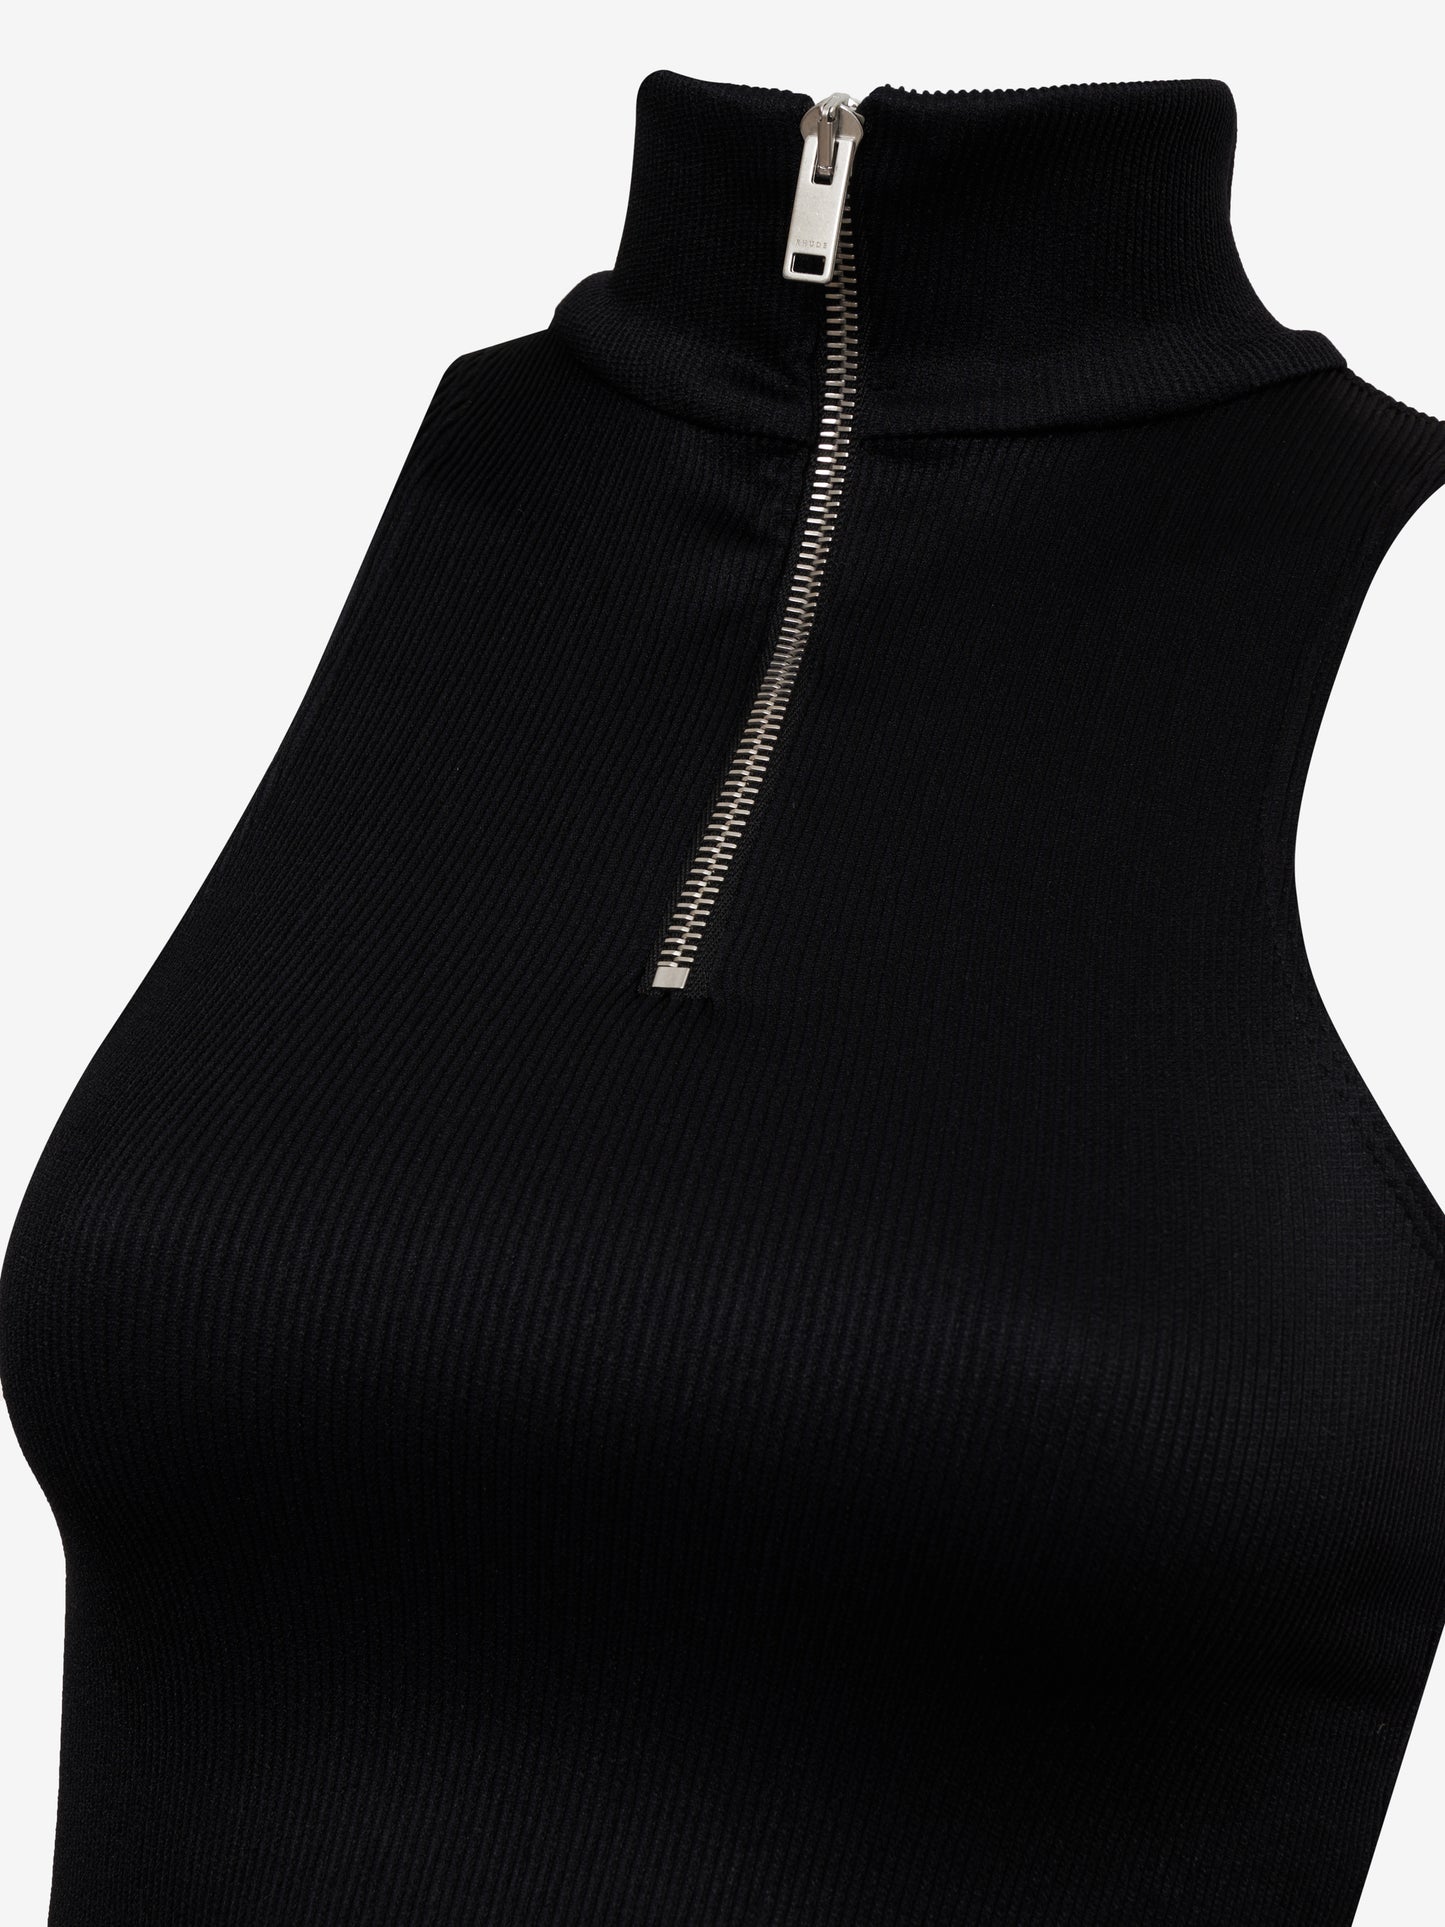 RIBBED KNIT TURTLE NECK ZIP TOP